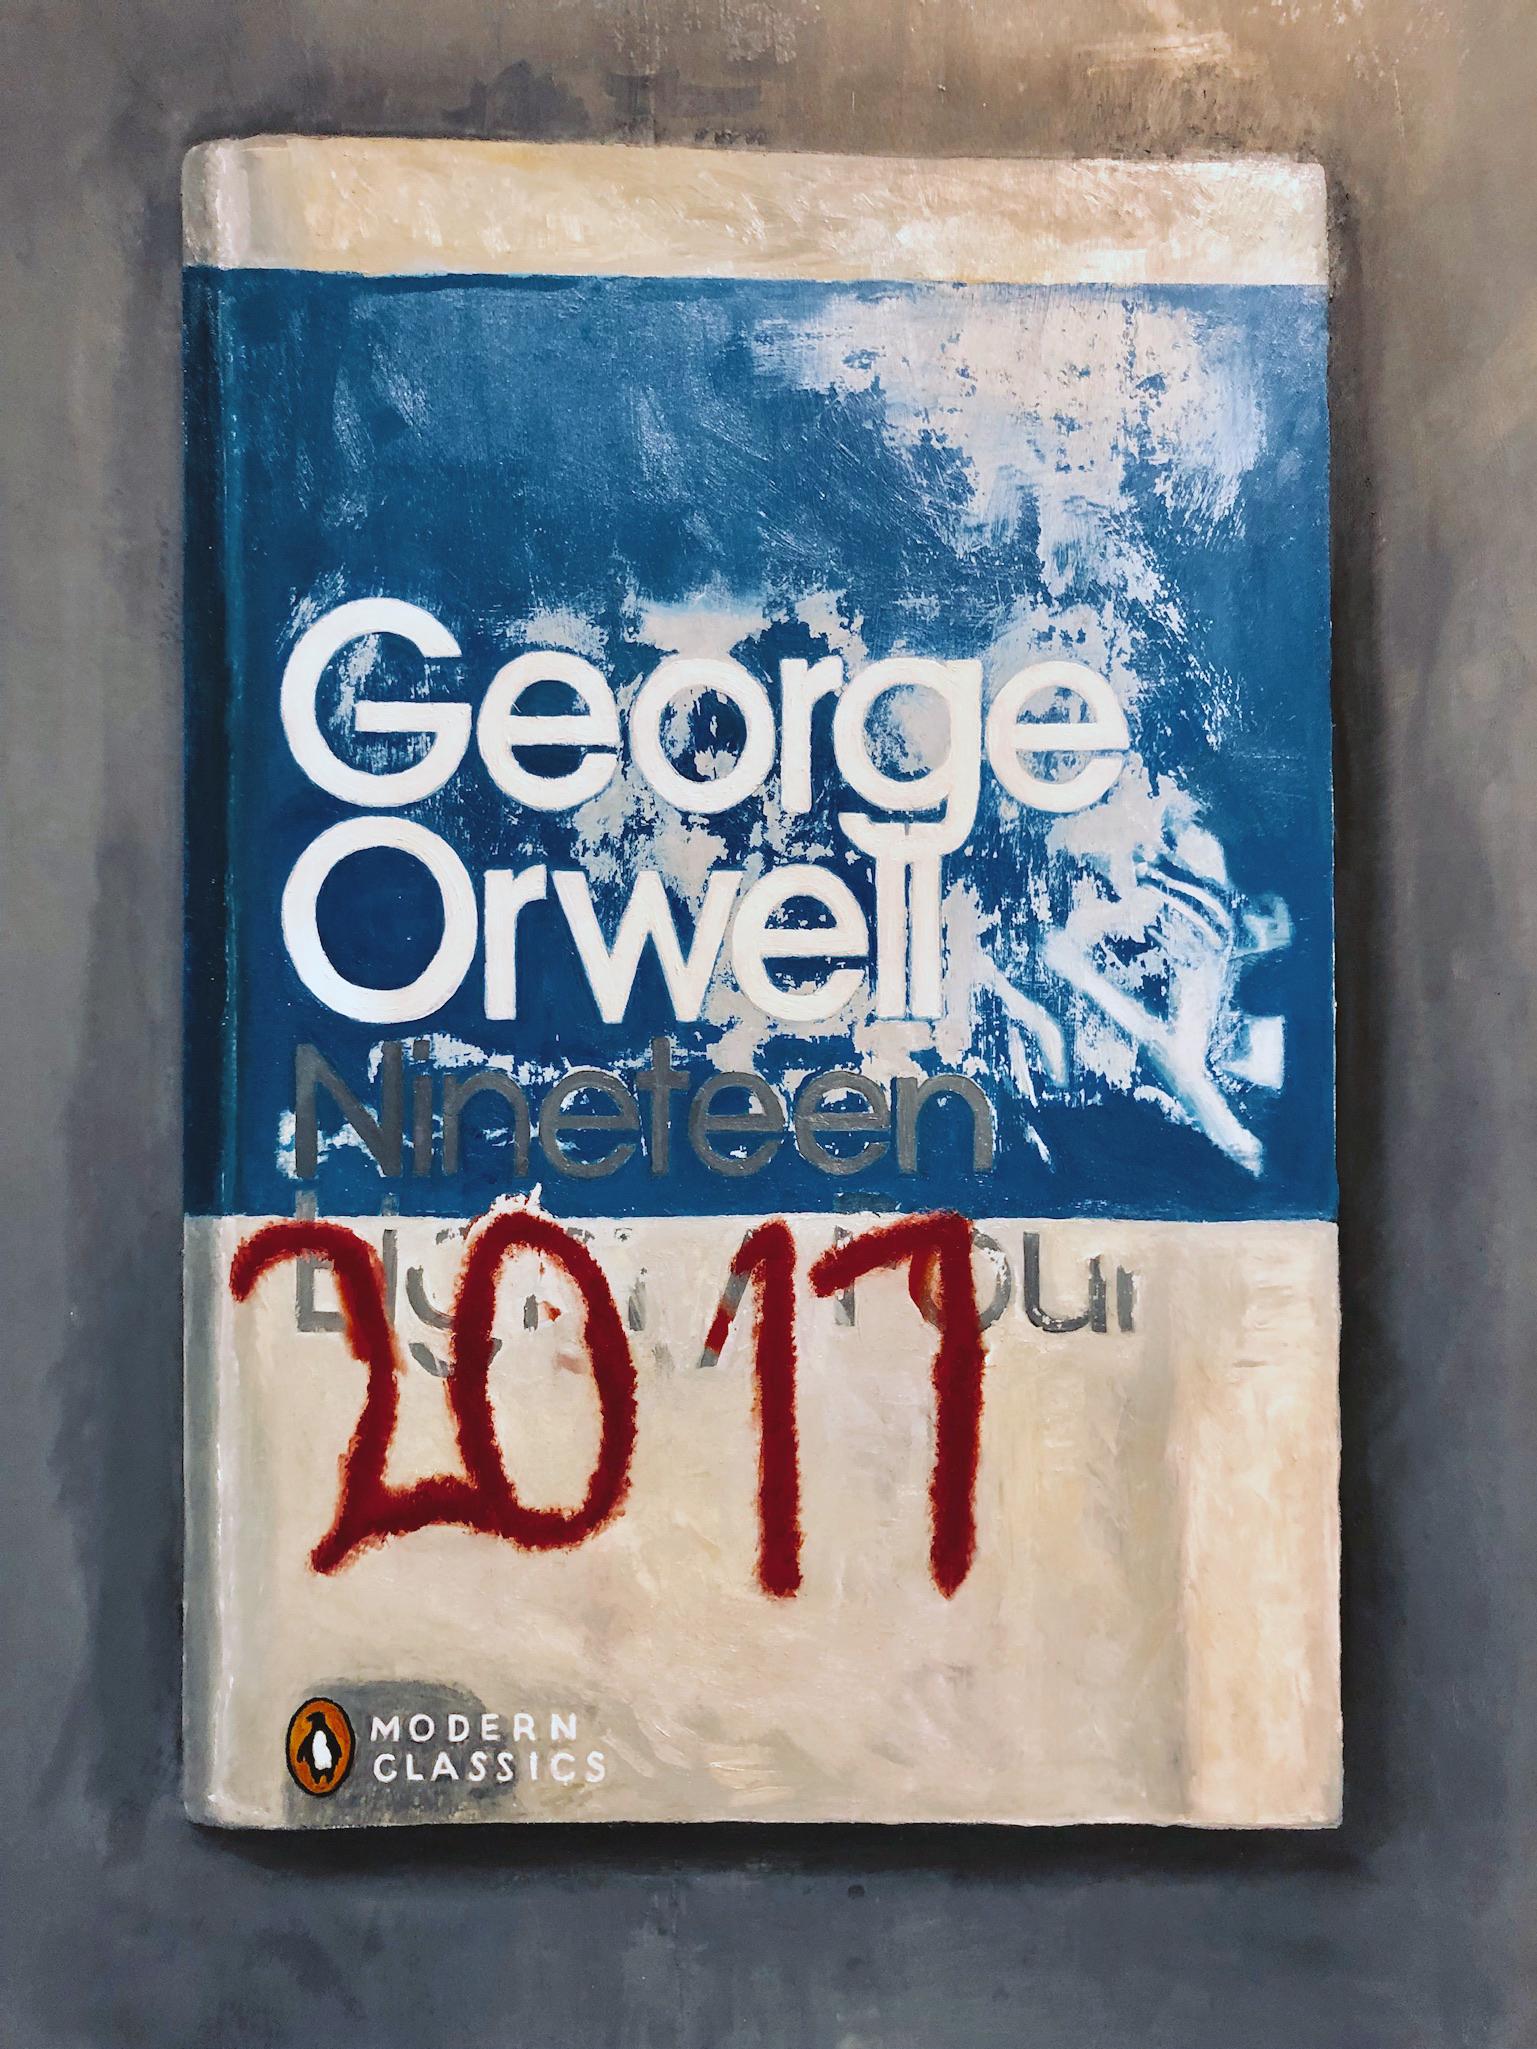 Don Pollack Landscape Painting - George Orwell, 2017 - Original Oil Painting of Fictional Oversized Book Cover